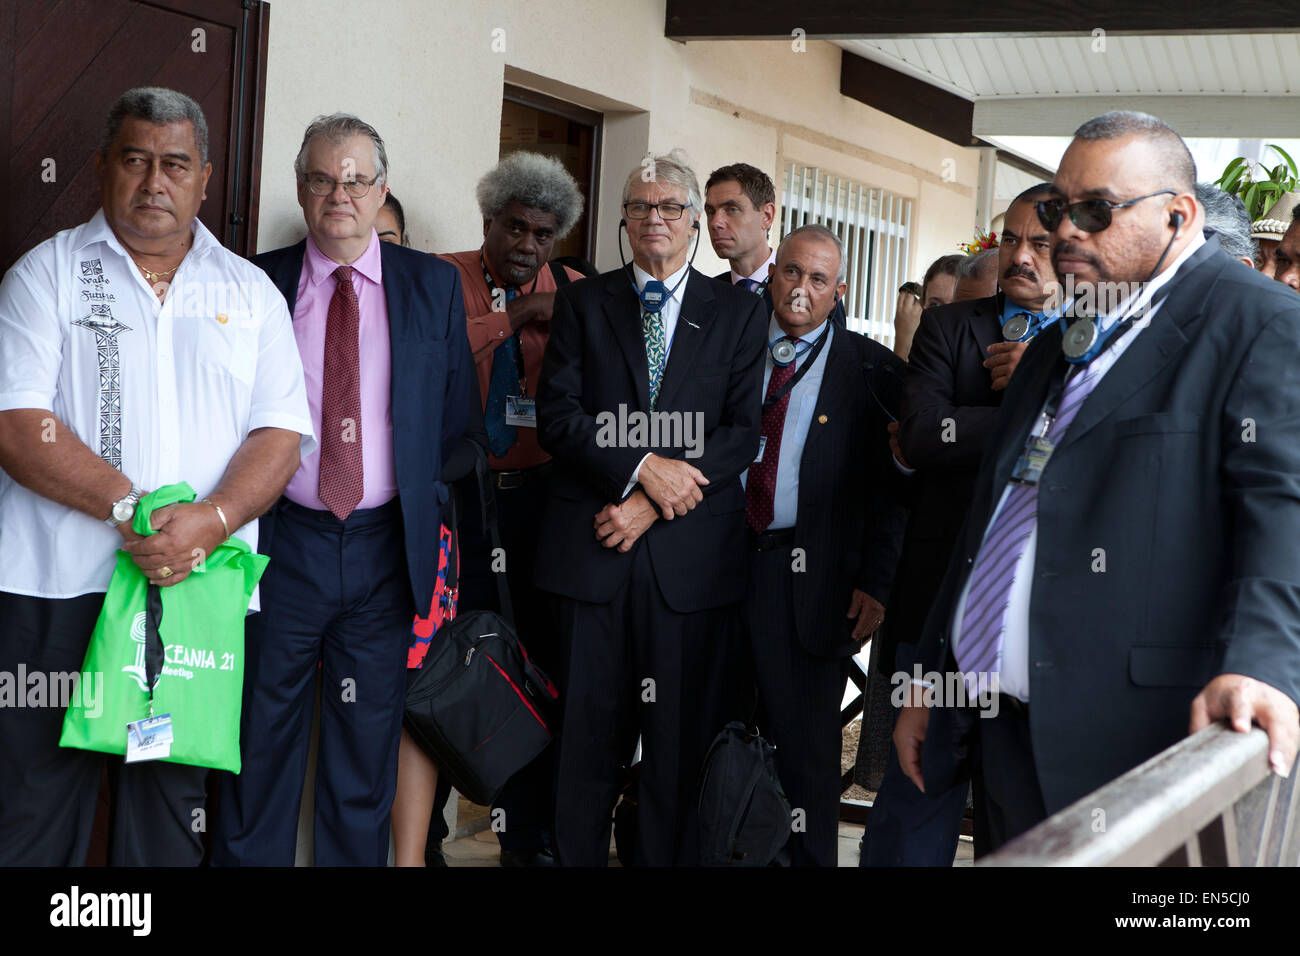 Noumea, New Caledonia. 28th April, 2015. Oceania 21, the third edition of the Oceanian summit on sustainable development. Representatives of 17 South Pacific countries attend the climate change summit on 28, 29 and 30 April. Noumea, New Caledonia. 28th April, 2015. countries, 28, 29 and 30 April, climate change, roundable in the wake of Cyclone PAM in the Pacific, traditional customs, Suve Sosefo, Wallis et Futuna, Marc Le Cherfy, Jean Pierre Nirua, Director of Operations GFLM, David Scheppard, Director General PROE, Sune Hjelmerv Gudnitz, Head of the Regional Office for the Pacific, United Na Stock Photo